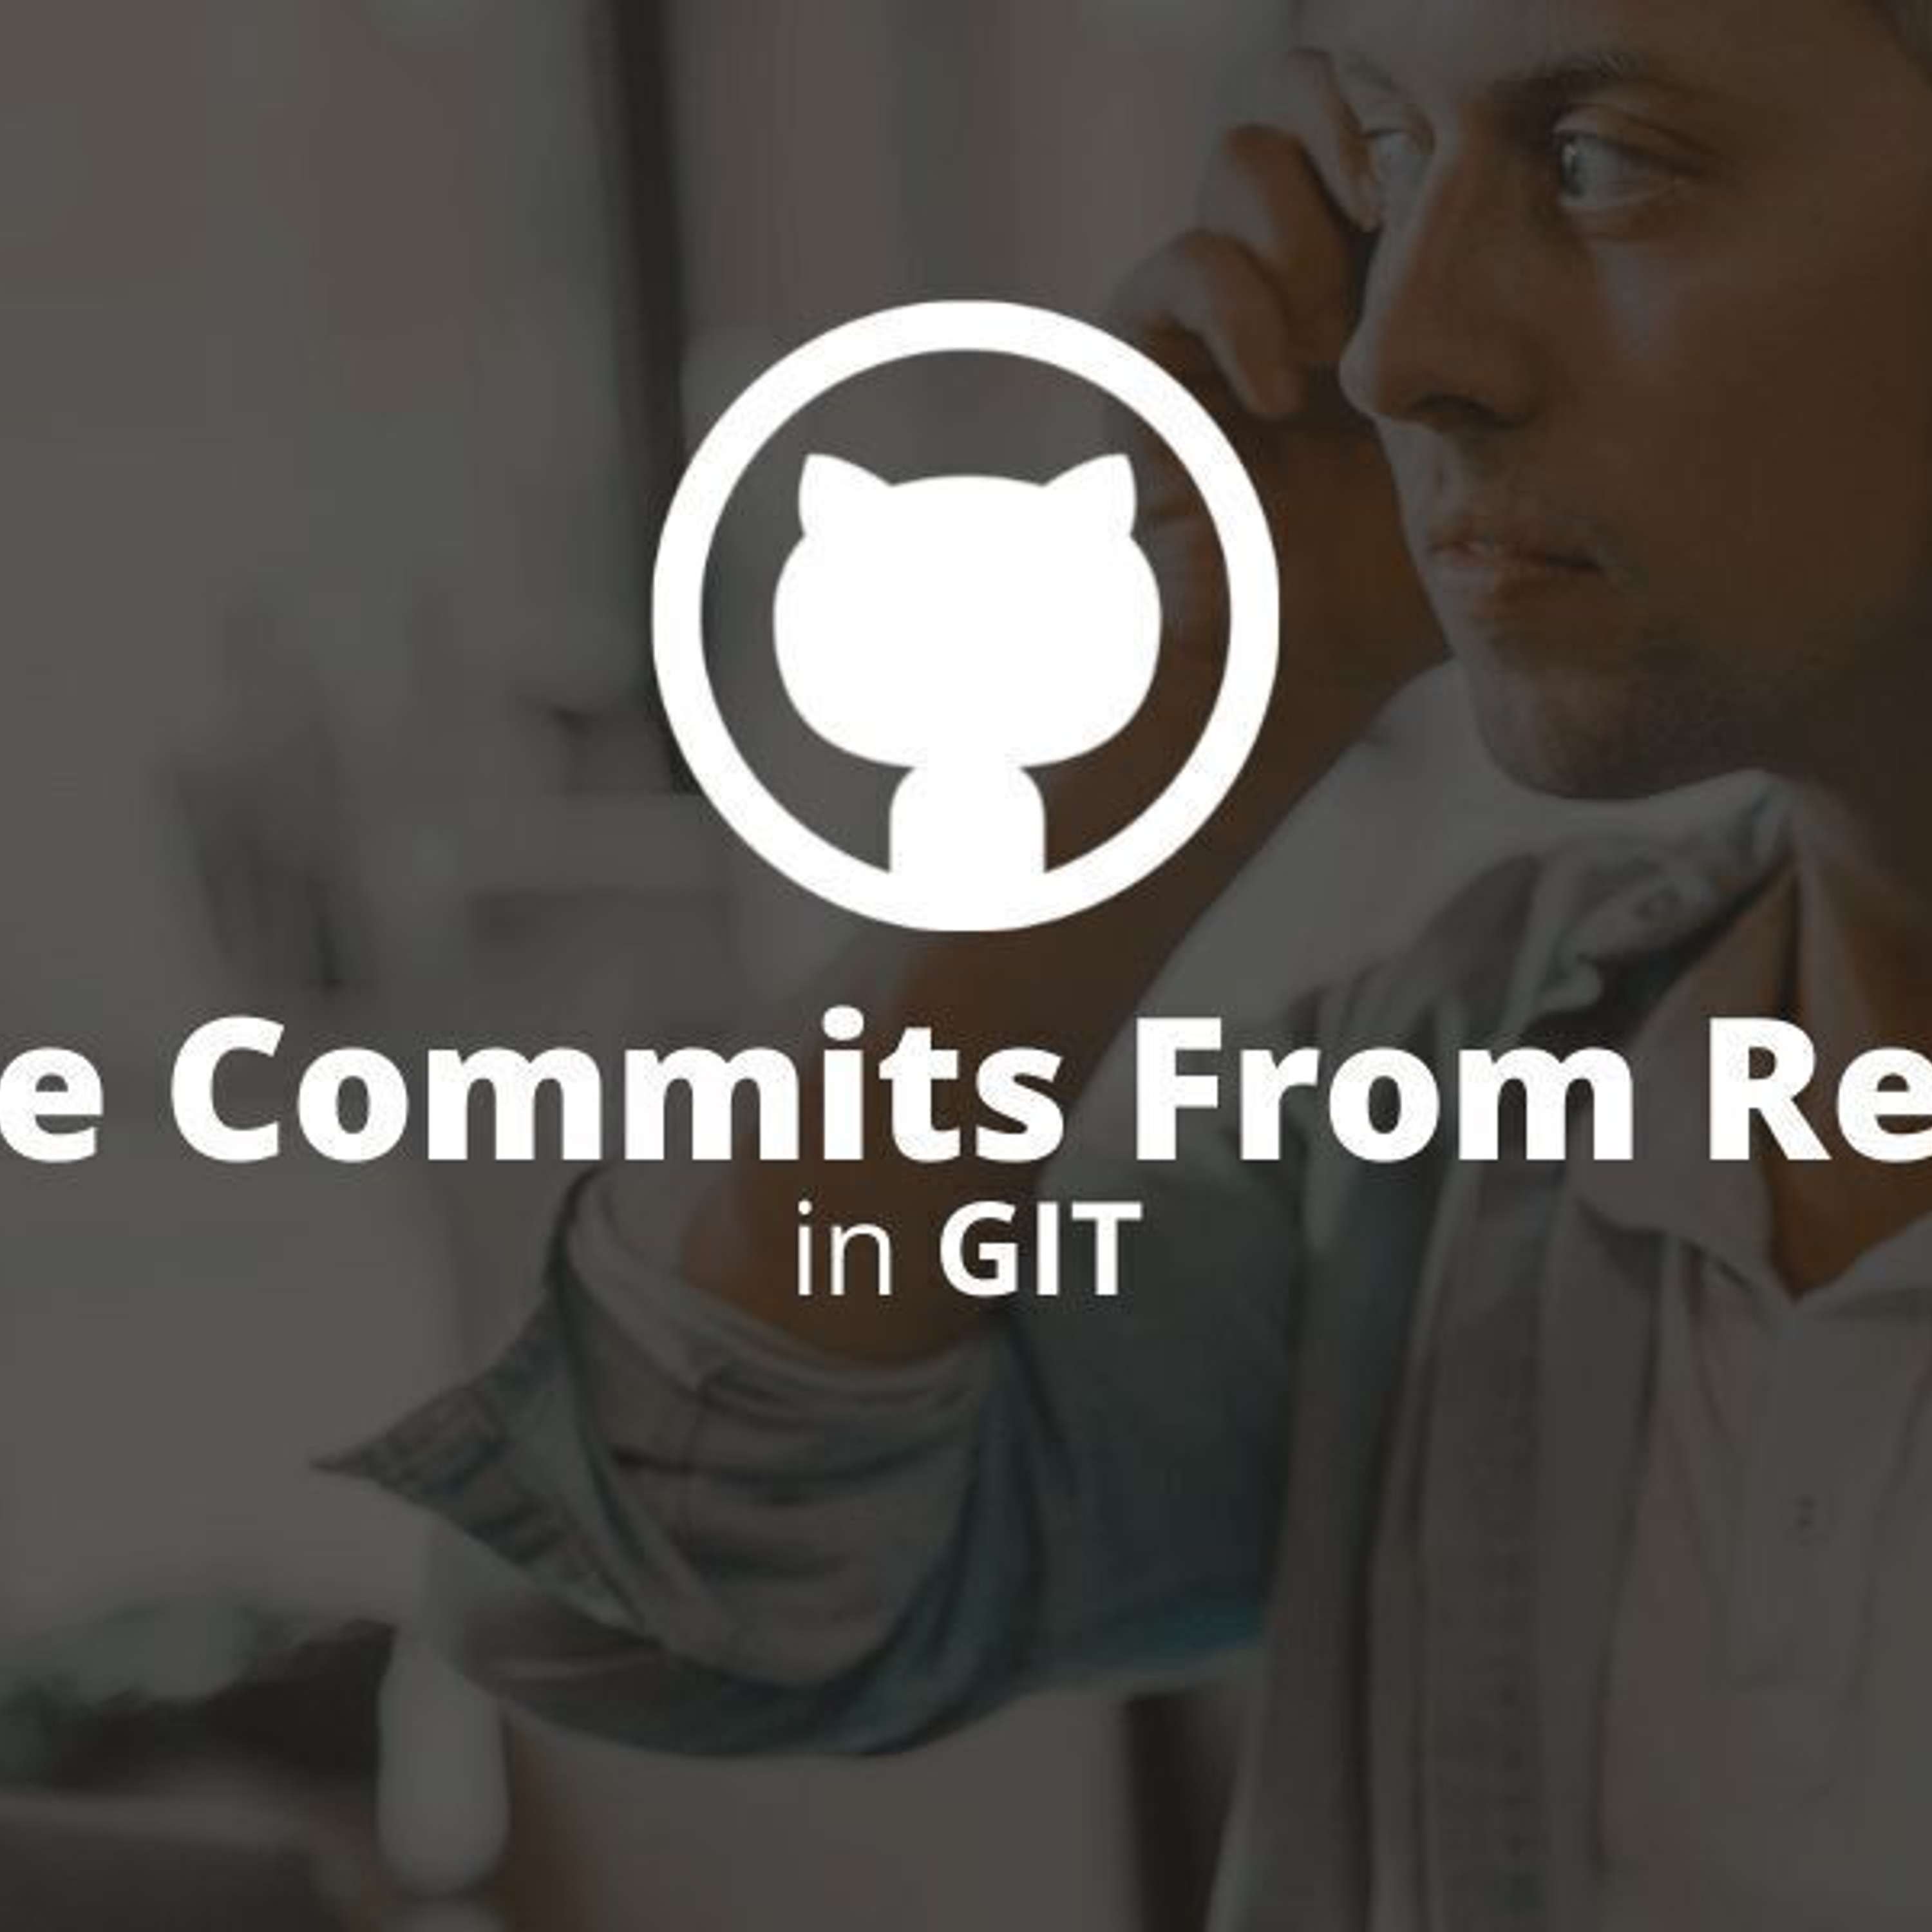 How to Delete Commits From Remote in Git